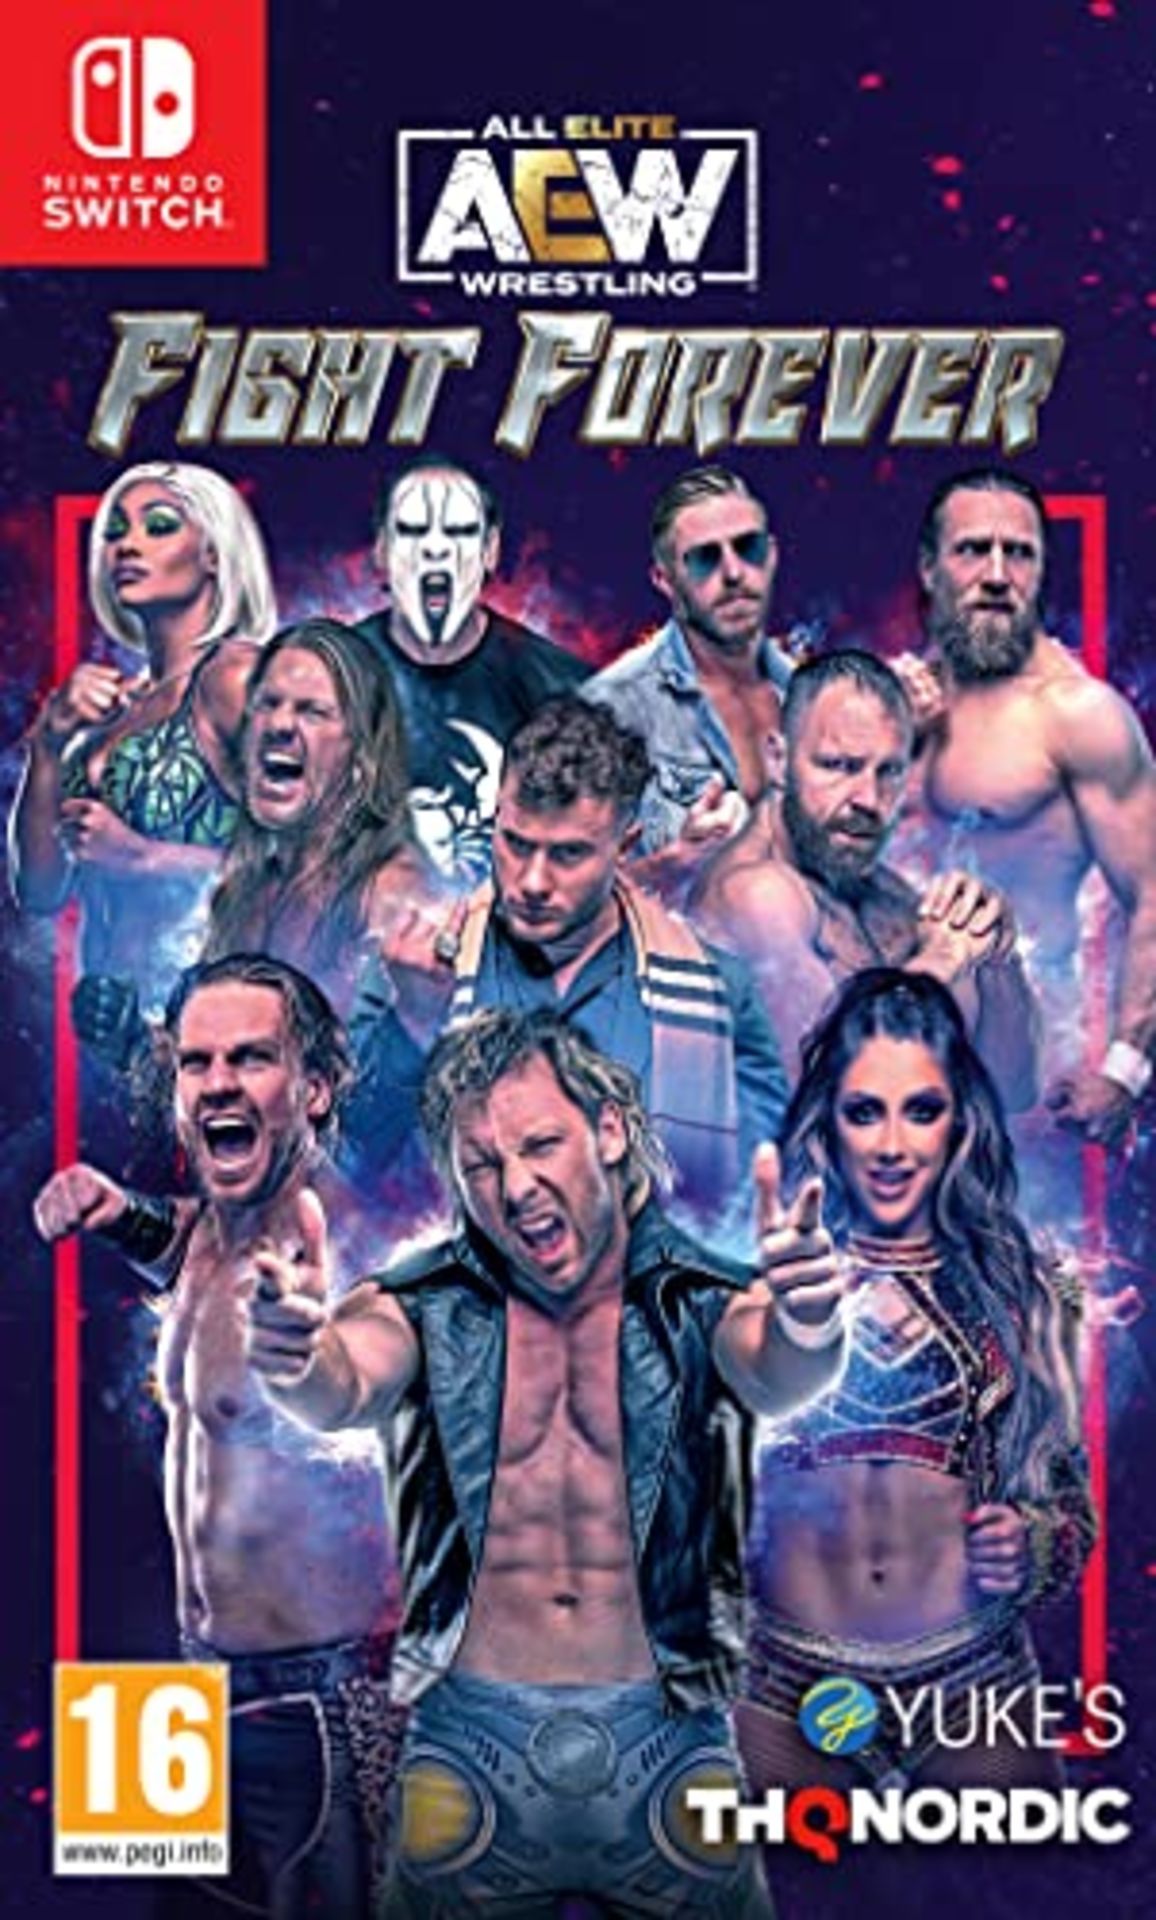 AEW: Fight Forever is a video game available on the Nintendo Switch platform.